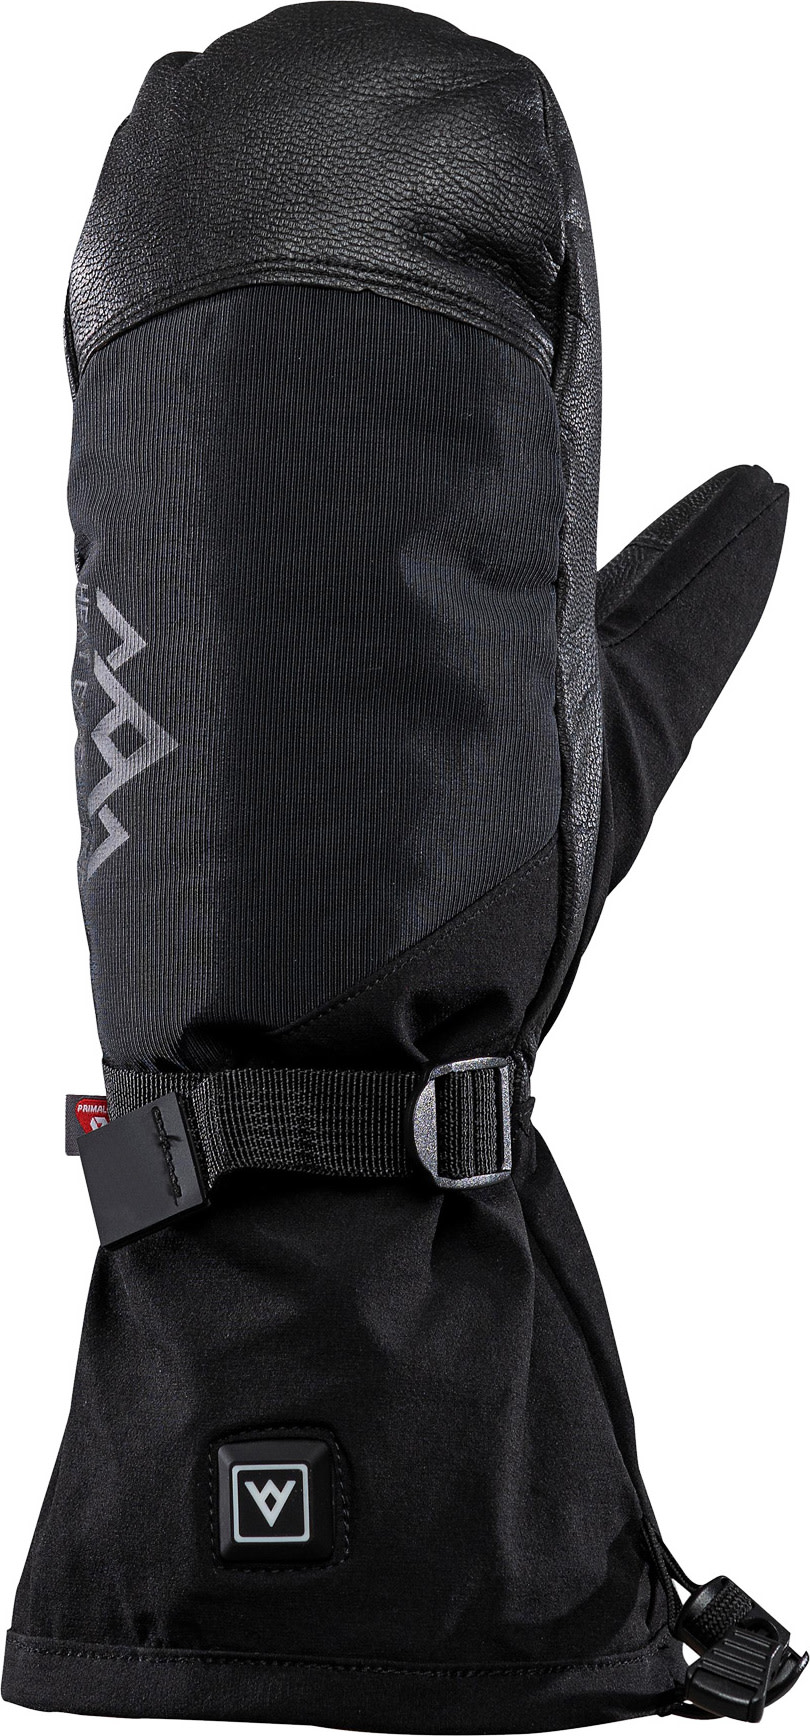 Heat Experience All-Mountain Heated Mittens Black